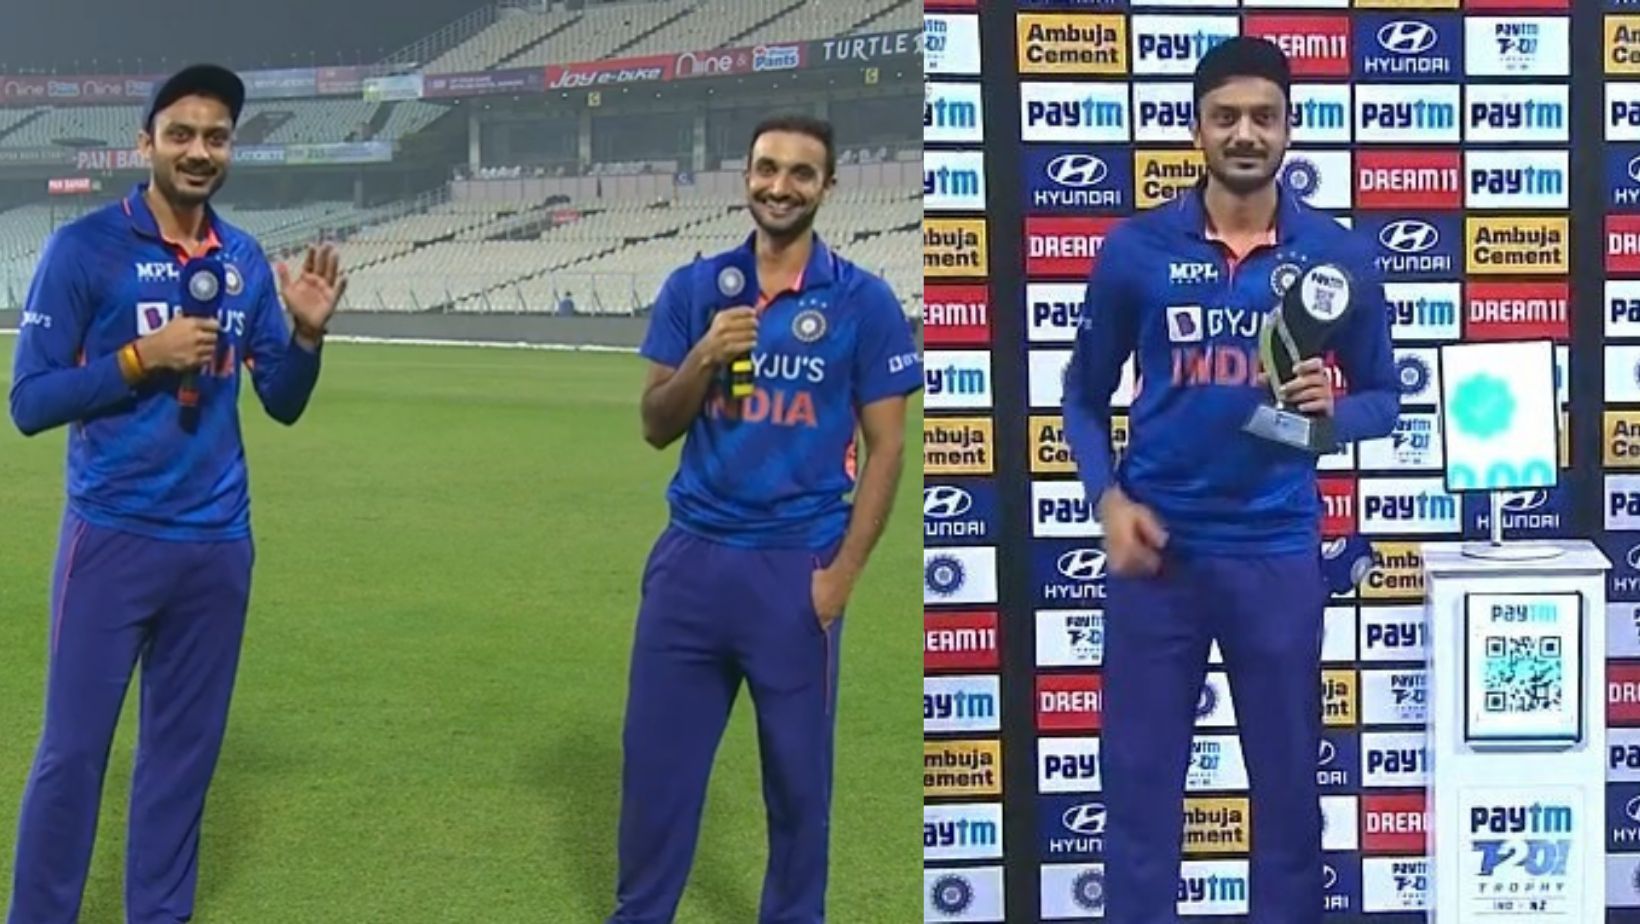 Axar Patel (L) and Harshal Patel celebrate their performances.